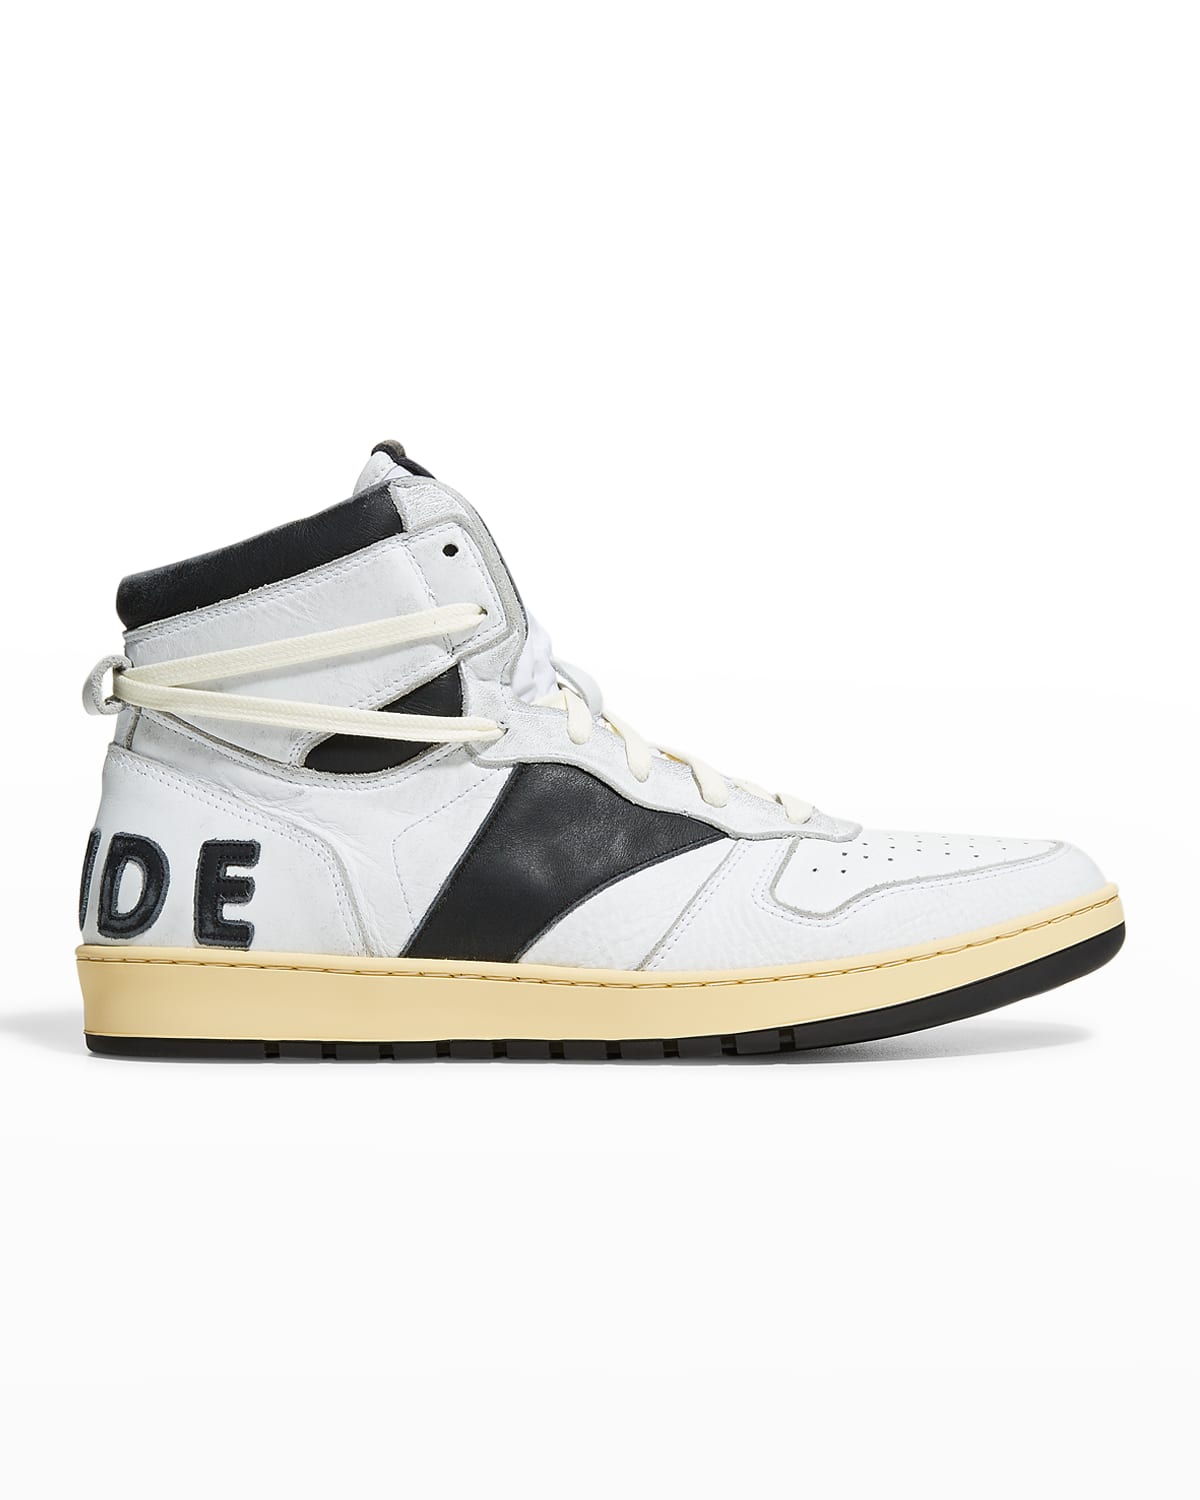 Men's Rhecess Vintage Leather Basketball High-Top Sneakers